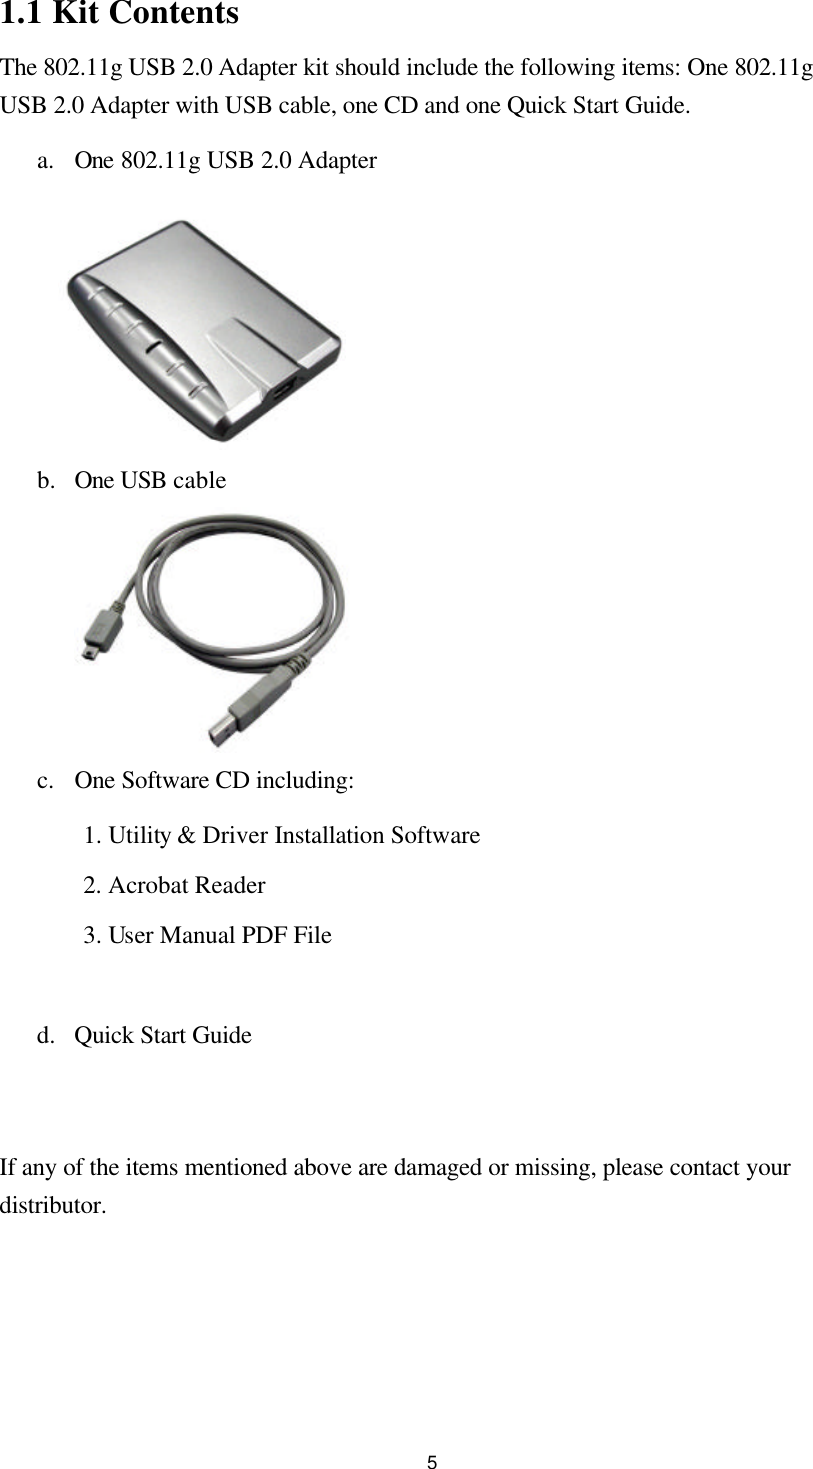  51.1 Kit Contents The 802.11g USB 2.0 Adapter kit should include the following items: One 802.11g USB 2.0 Adapter with USB cable, one CD and one Quick Start Guide. a. One 802.11g USB 2.0 Adapter    b.  One USB cable      c. One Software CD including: 1. Utility &amp; Driver Installation Software 2. Acrobat Reader   3. User Manual PDF File  d.  Quick Start Guide   If any of the items mentioned above are damaged or missing, please contact your distributor. 